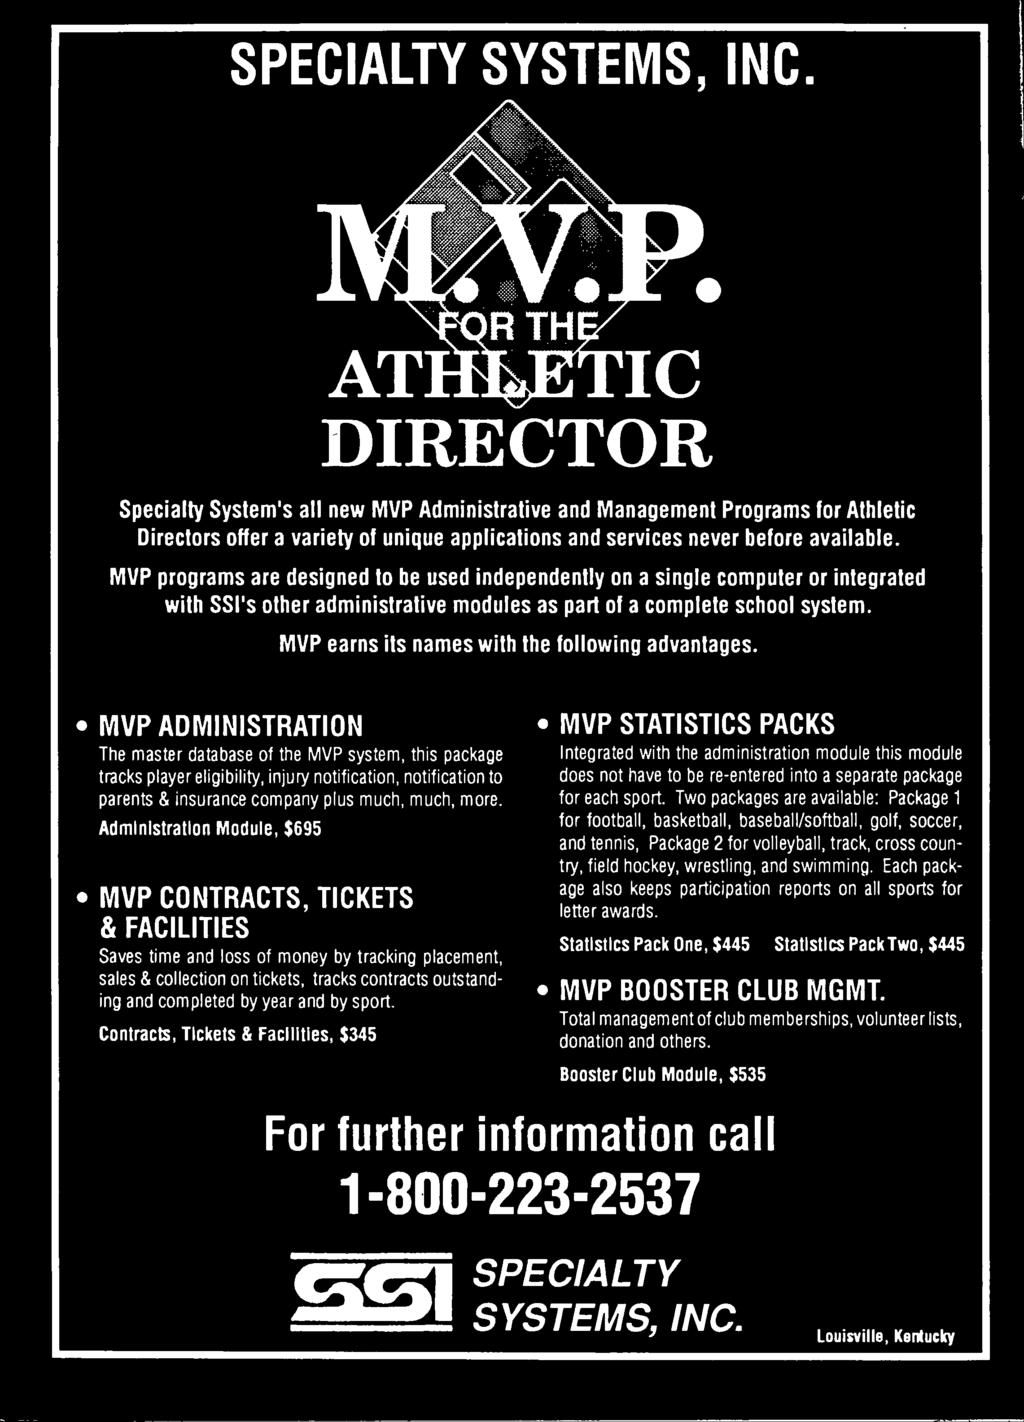 MVP ADMINISTRATION The master database of the MVP system, this package tracks player eligibility, injury notification, notification to parents & insurance company plus much, much, more.